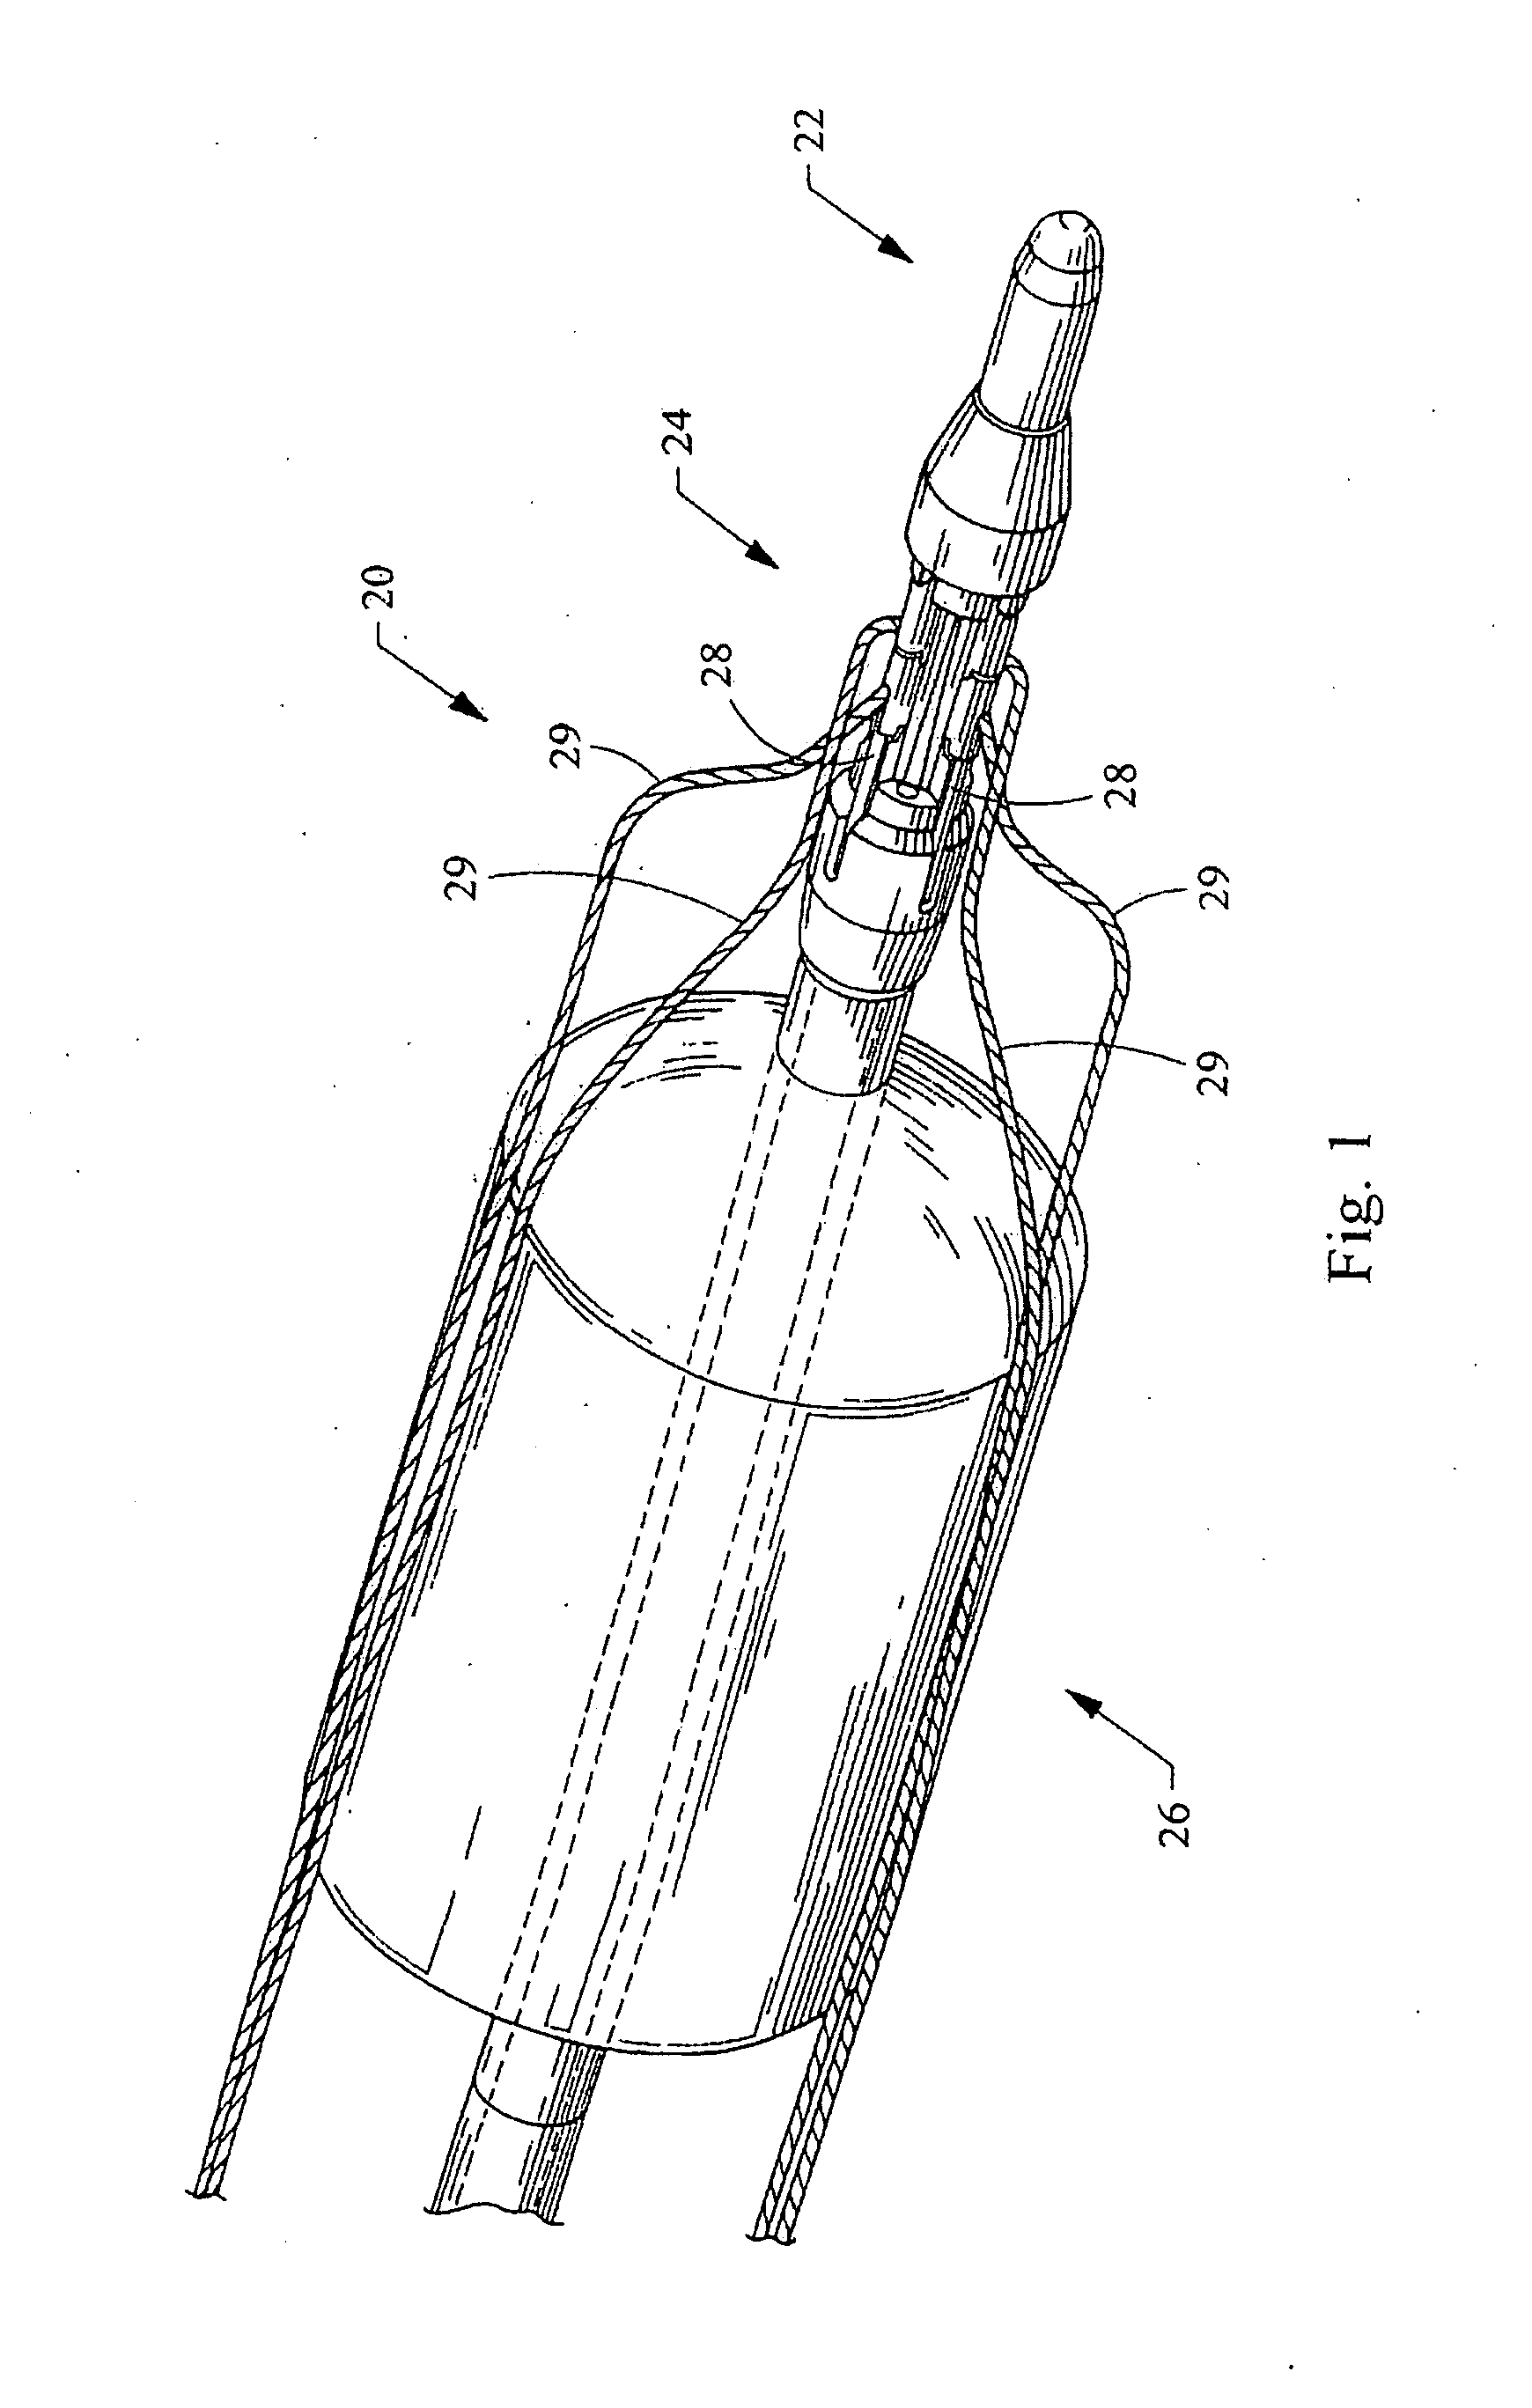 Device to open and close a bodily wall